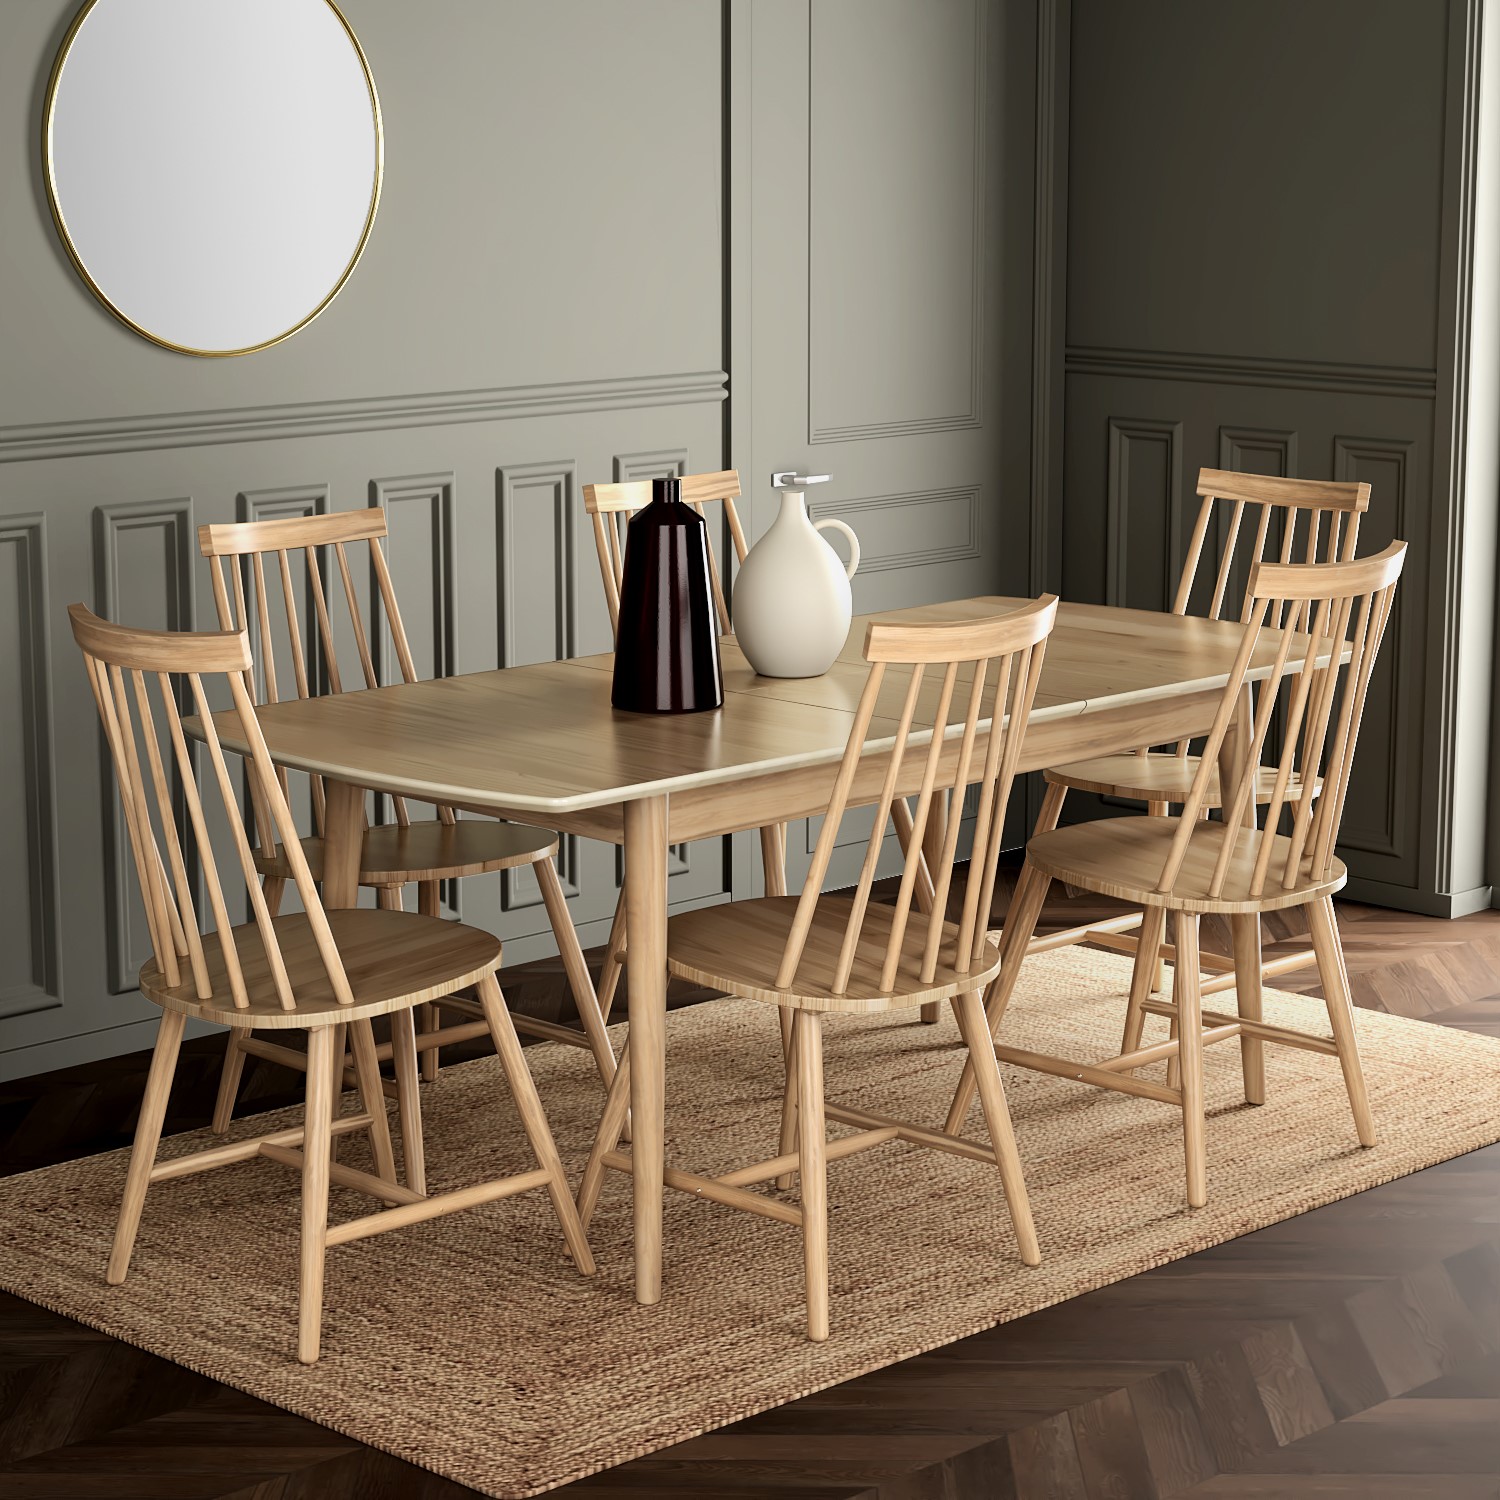 8 Seater Extendable Dining Table In Oak, 8 Seat Dining Room Table